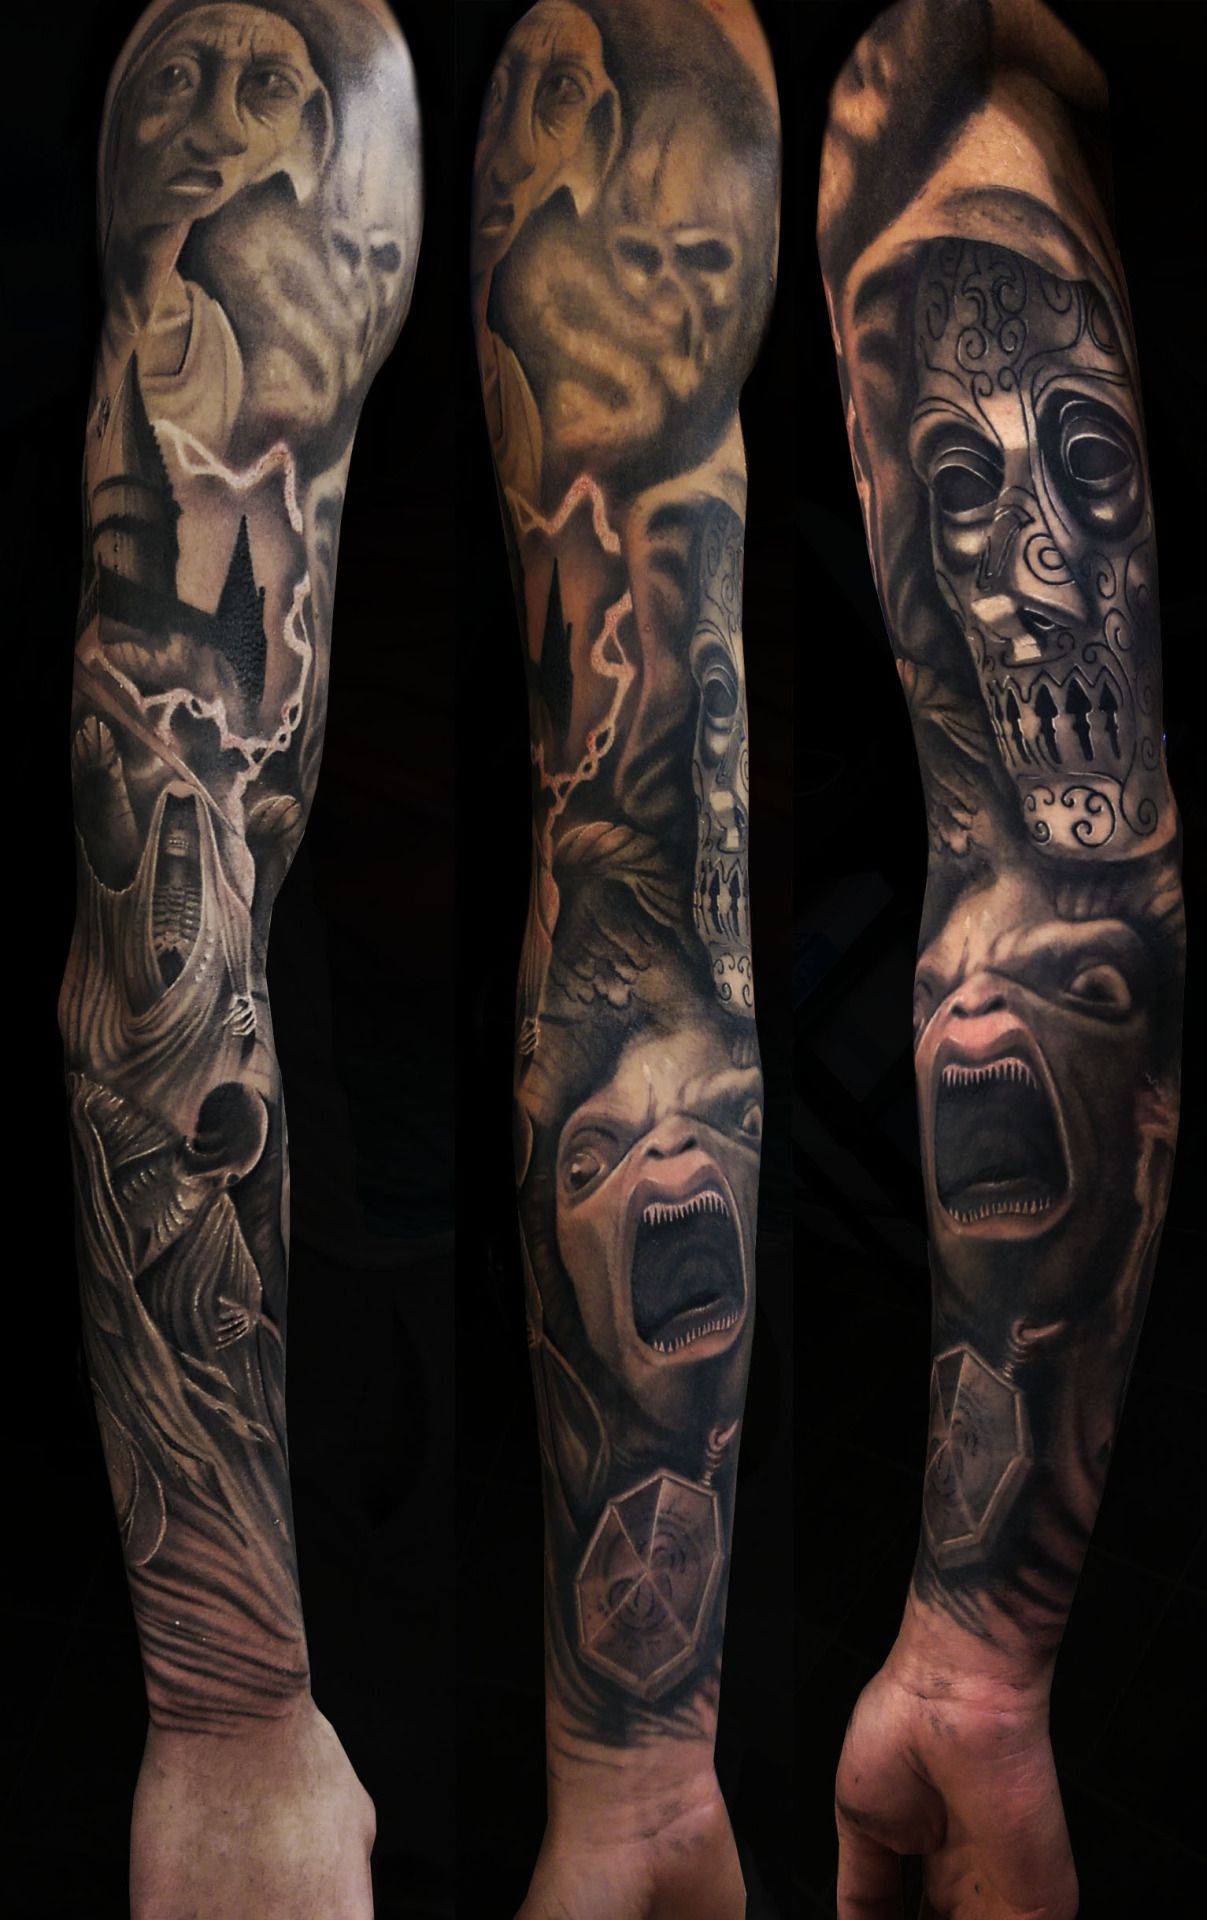 1337tattoos This Is A Dark Harry Potter Themed Sleeve regarding proportions 1207 X 1920